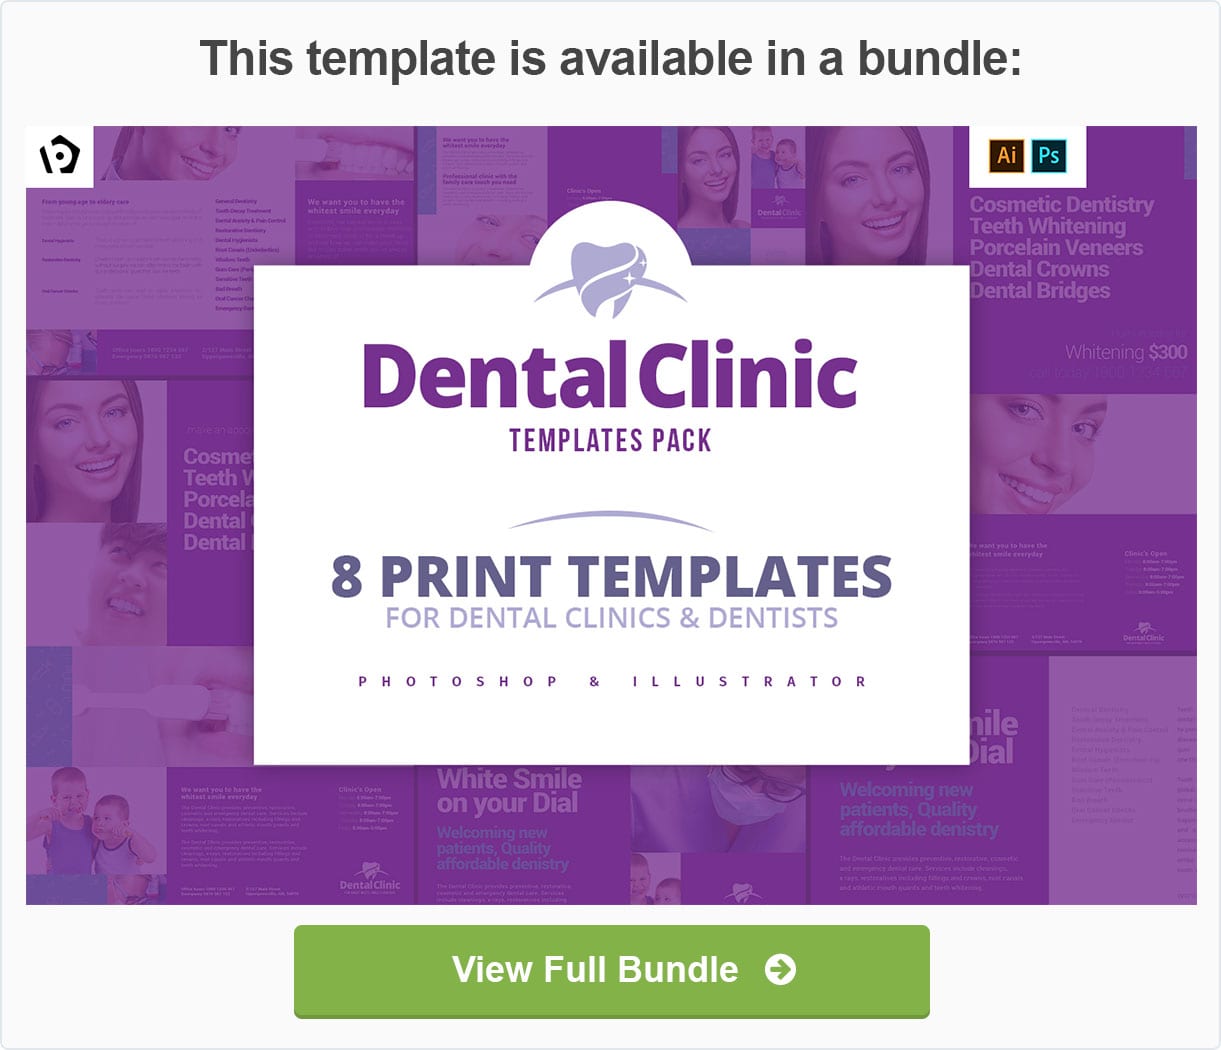 Dental Clinic Templates Pack by BrandPacks